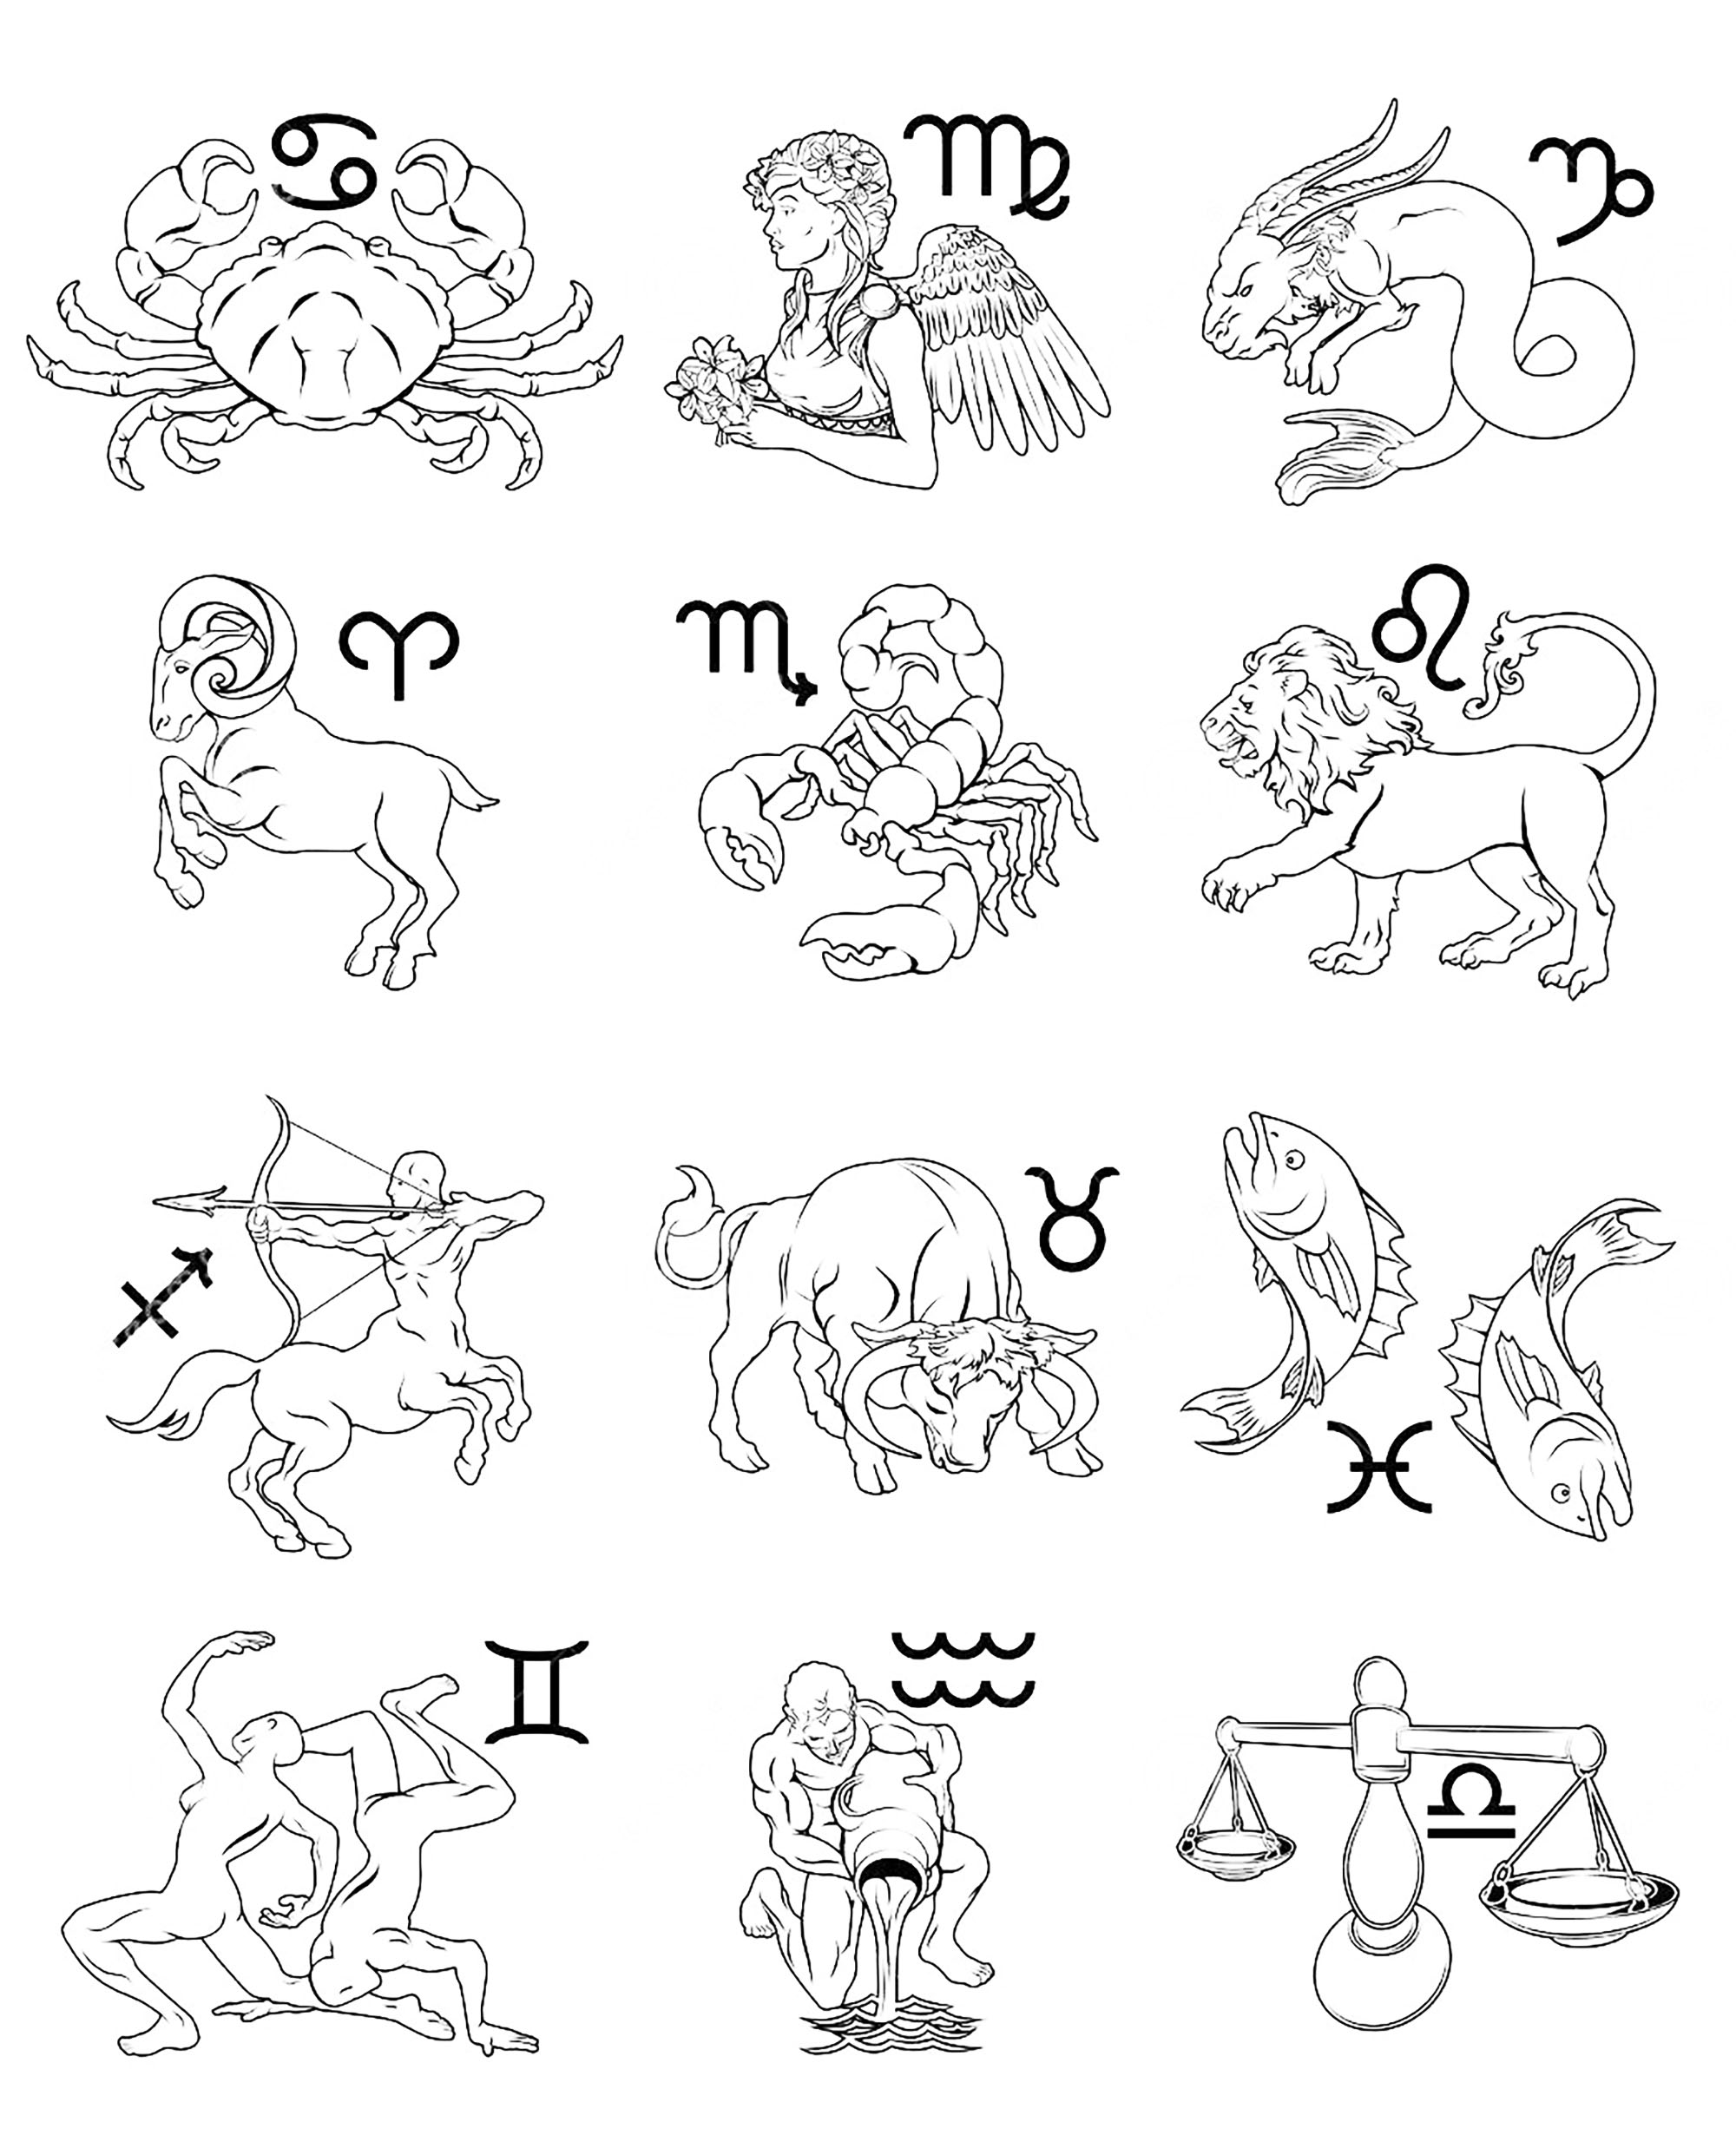 free-coloring-pages-of-zodiac-signs-to-color-zodiac-signs-kids